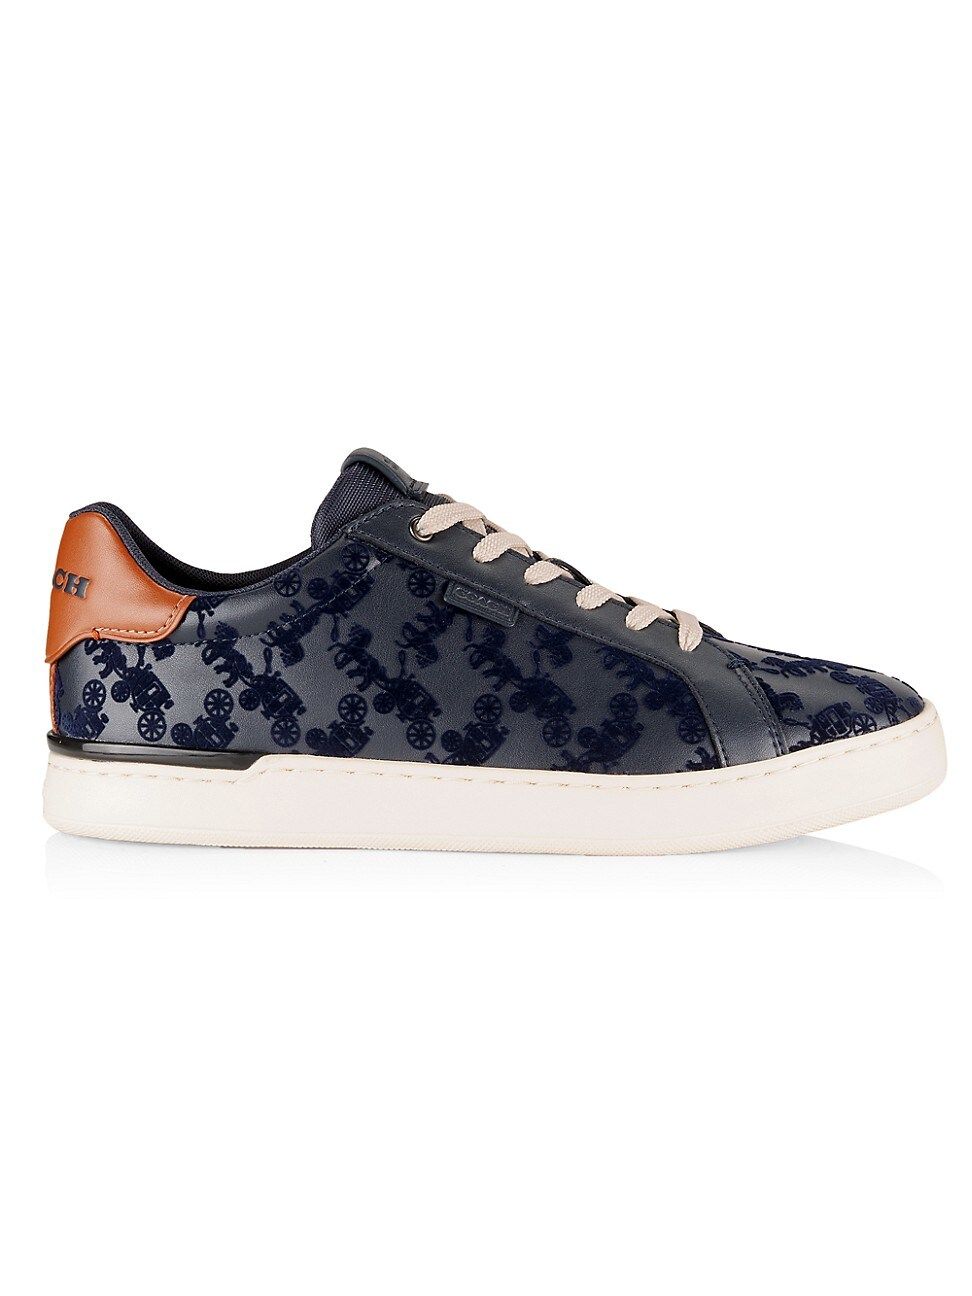 Men's Flocked Leather Low-Top Sneakers - Midnight Navy - Size 7.5 | Saks Fifth Avenue